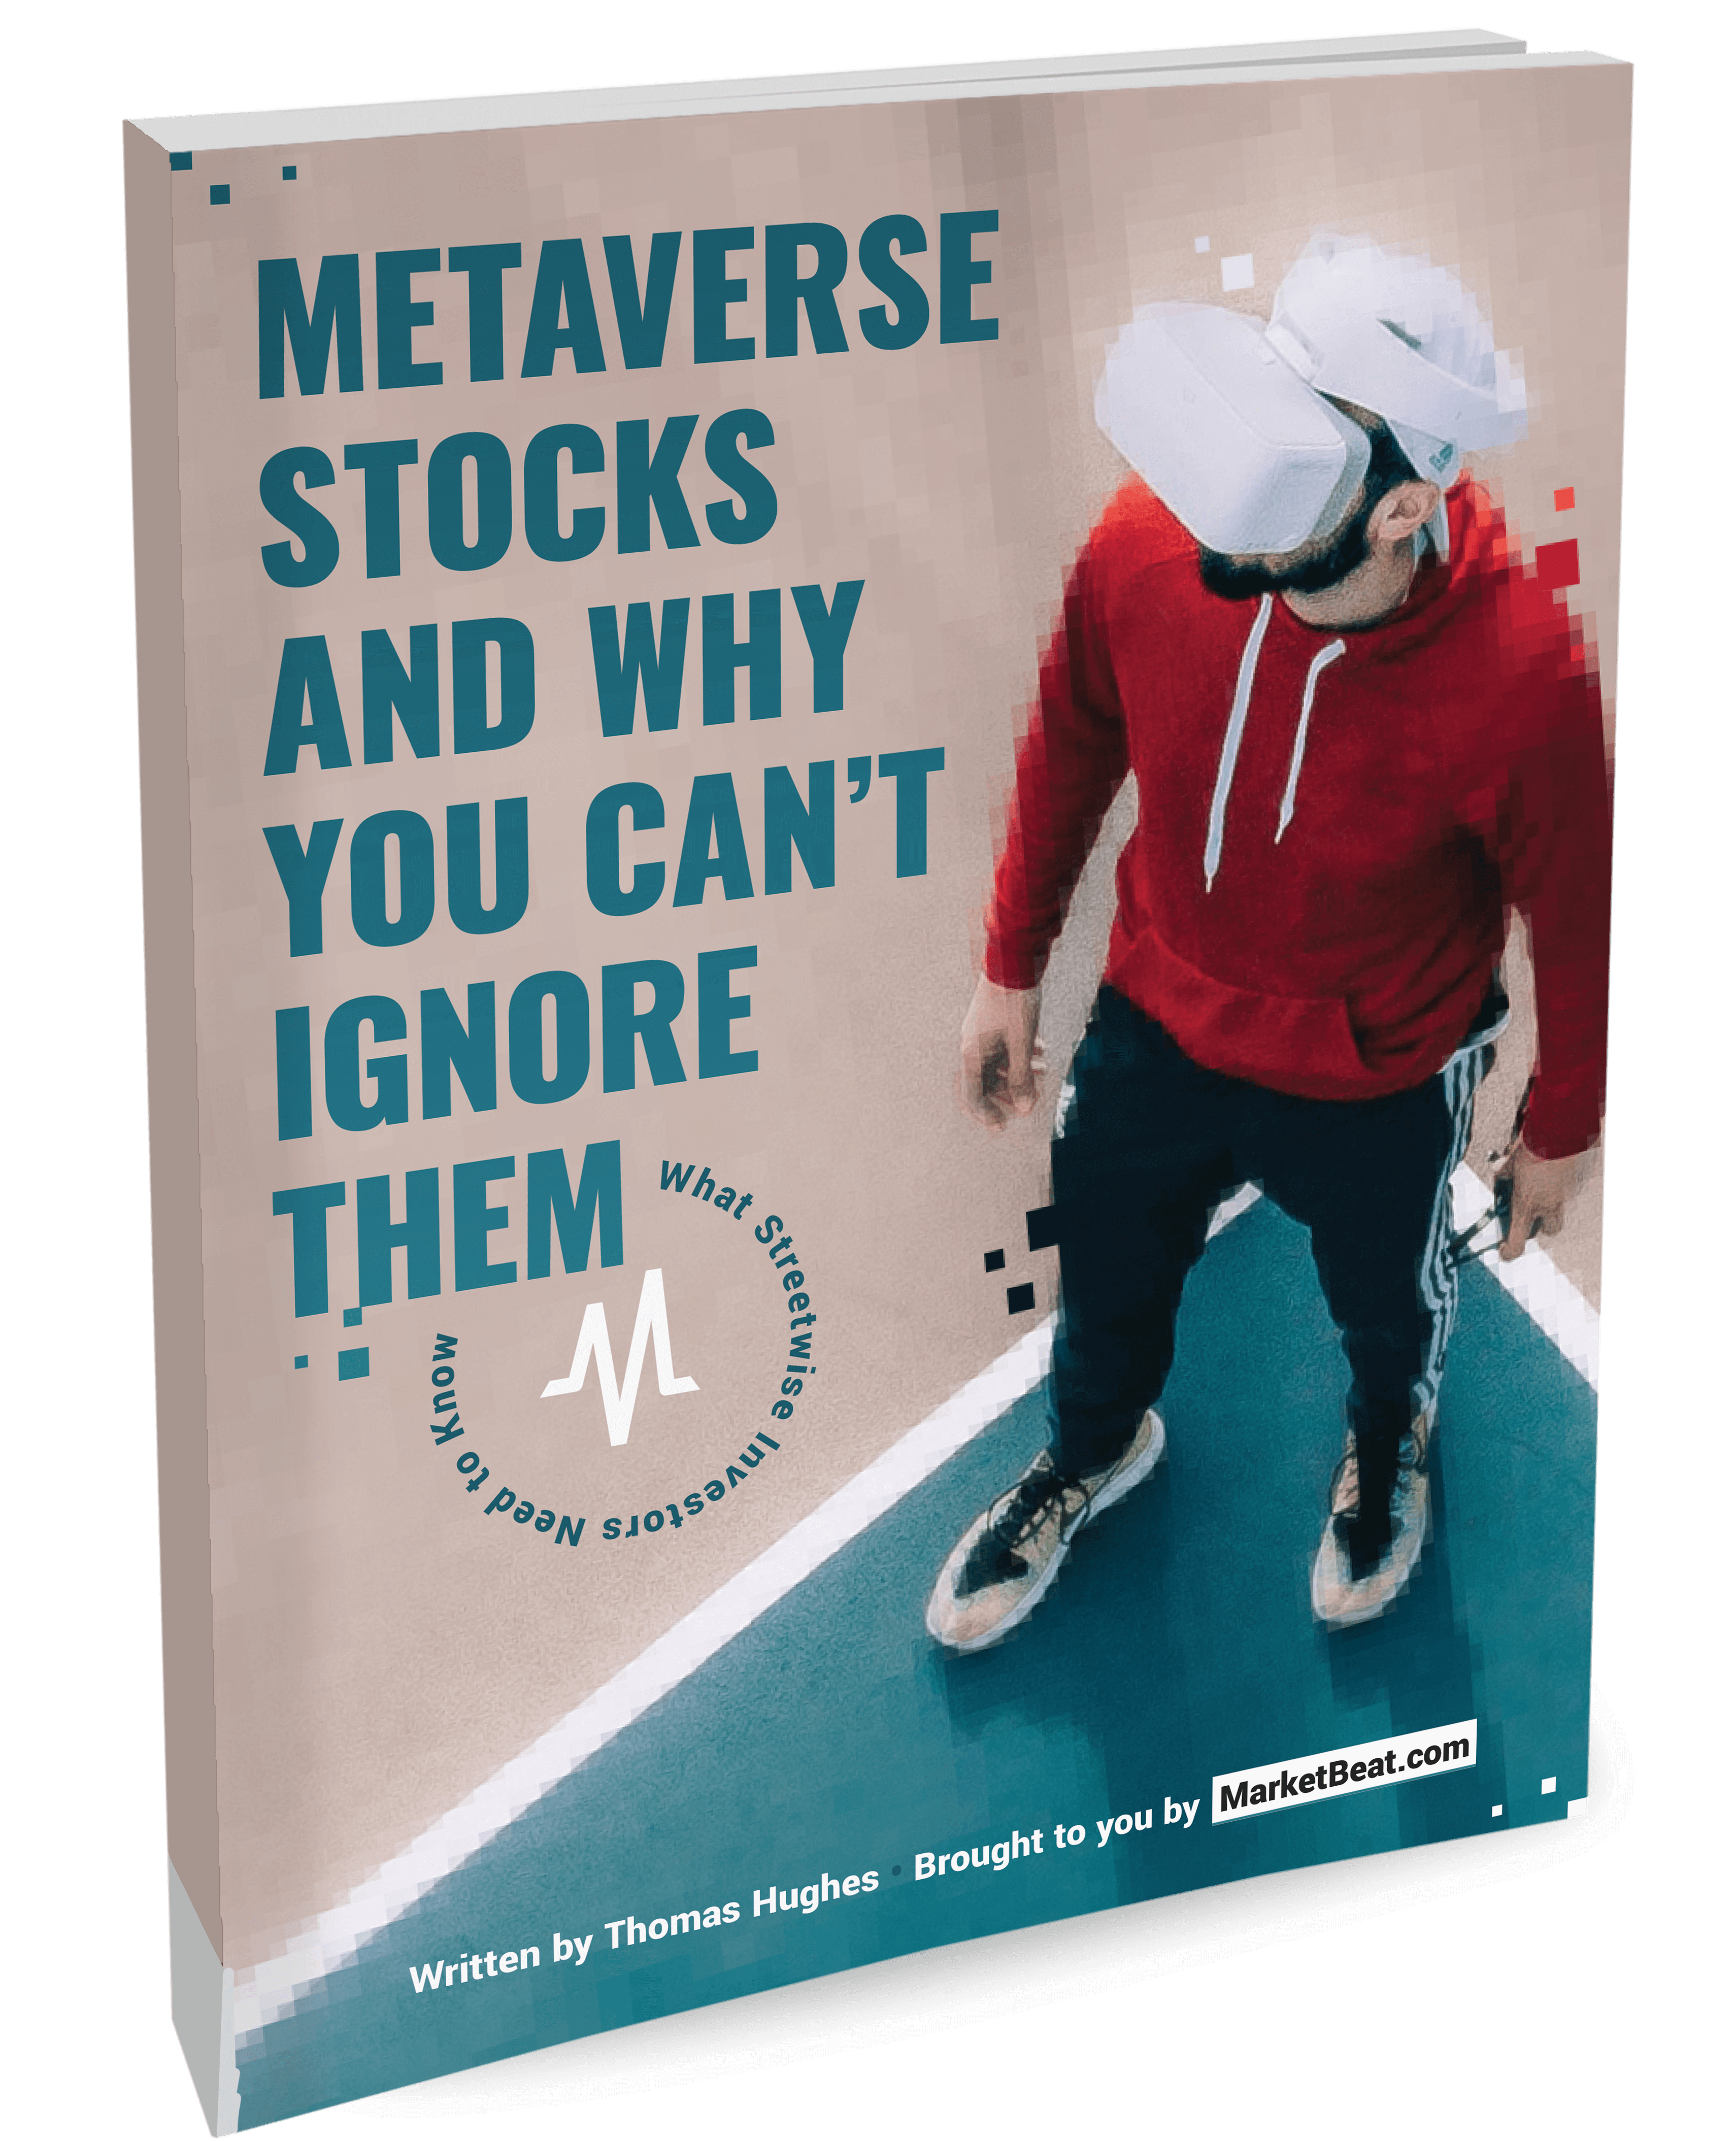 Metaverse Stocks And Why You Can't Ignore The Cover